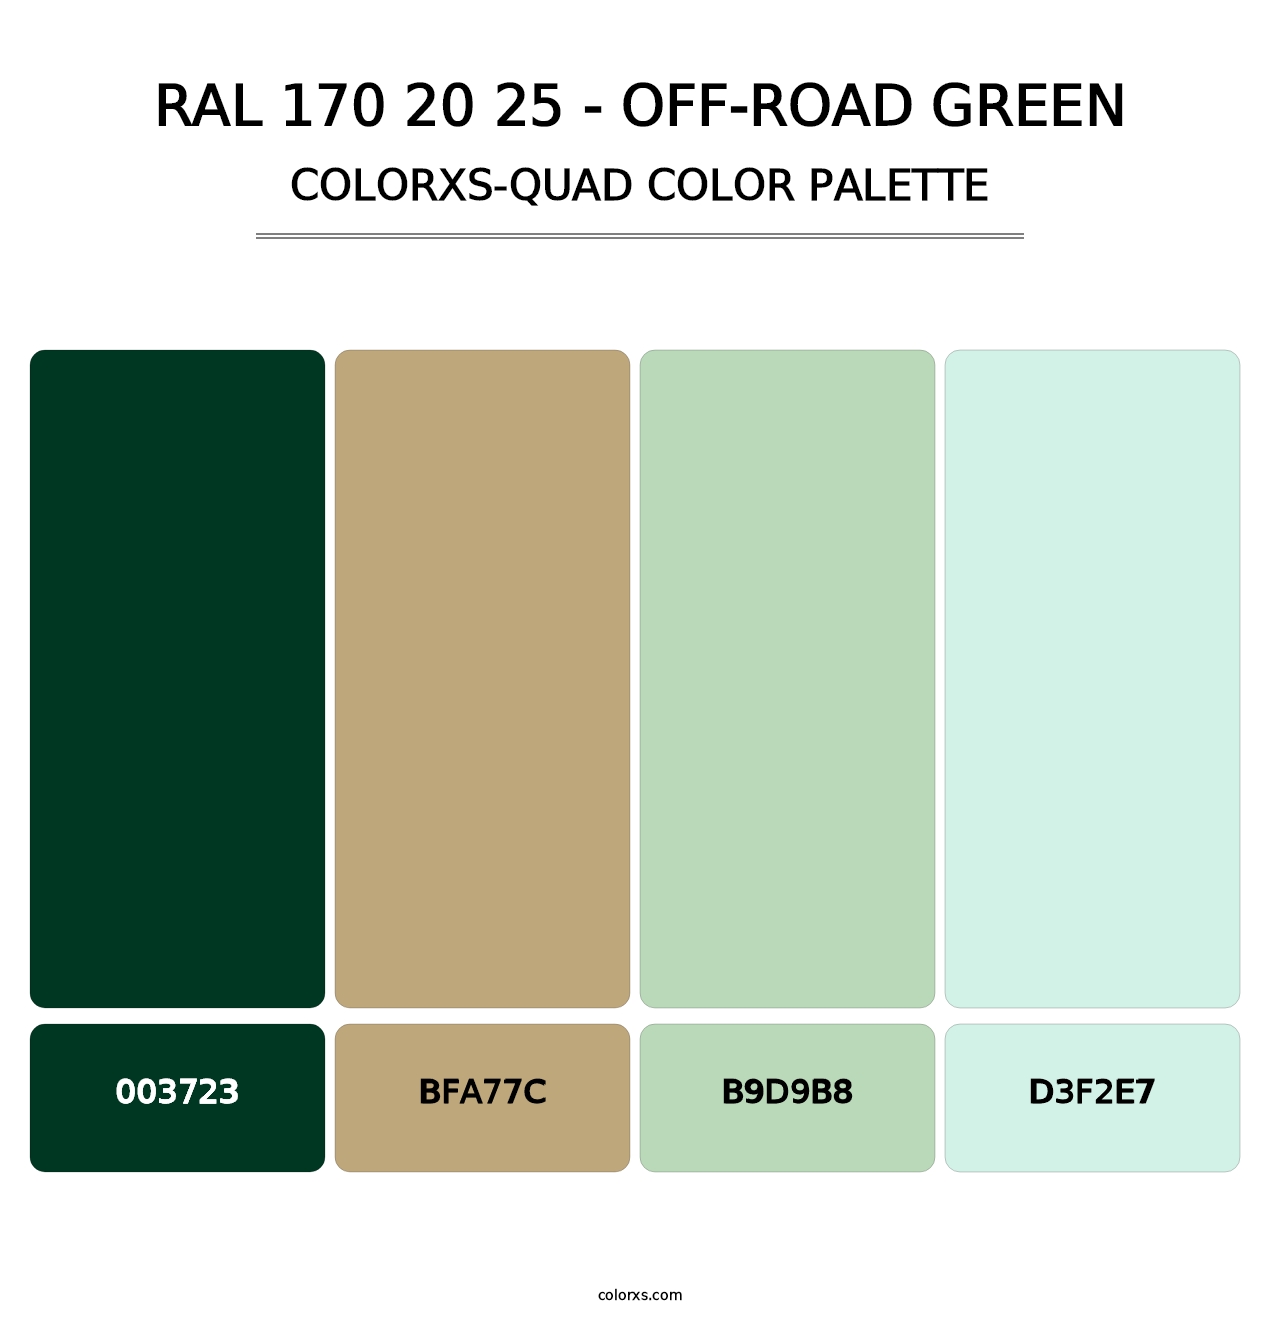 RAL 170 20 25 - Off-Road Green - Colorxs Quad Palette